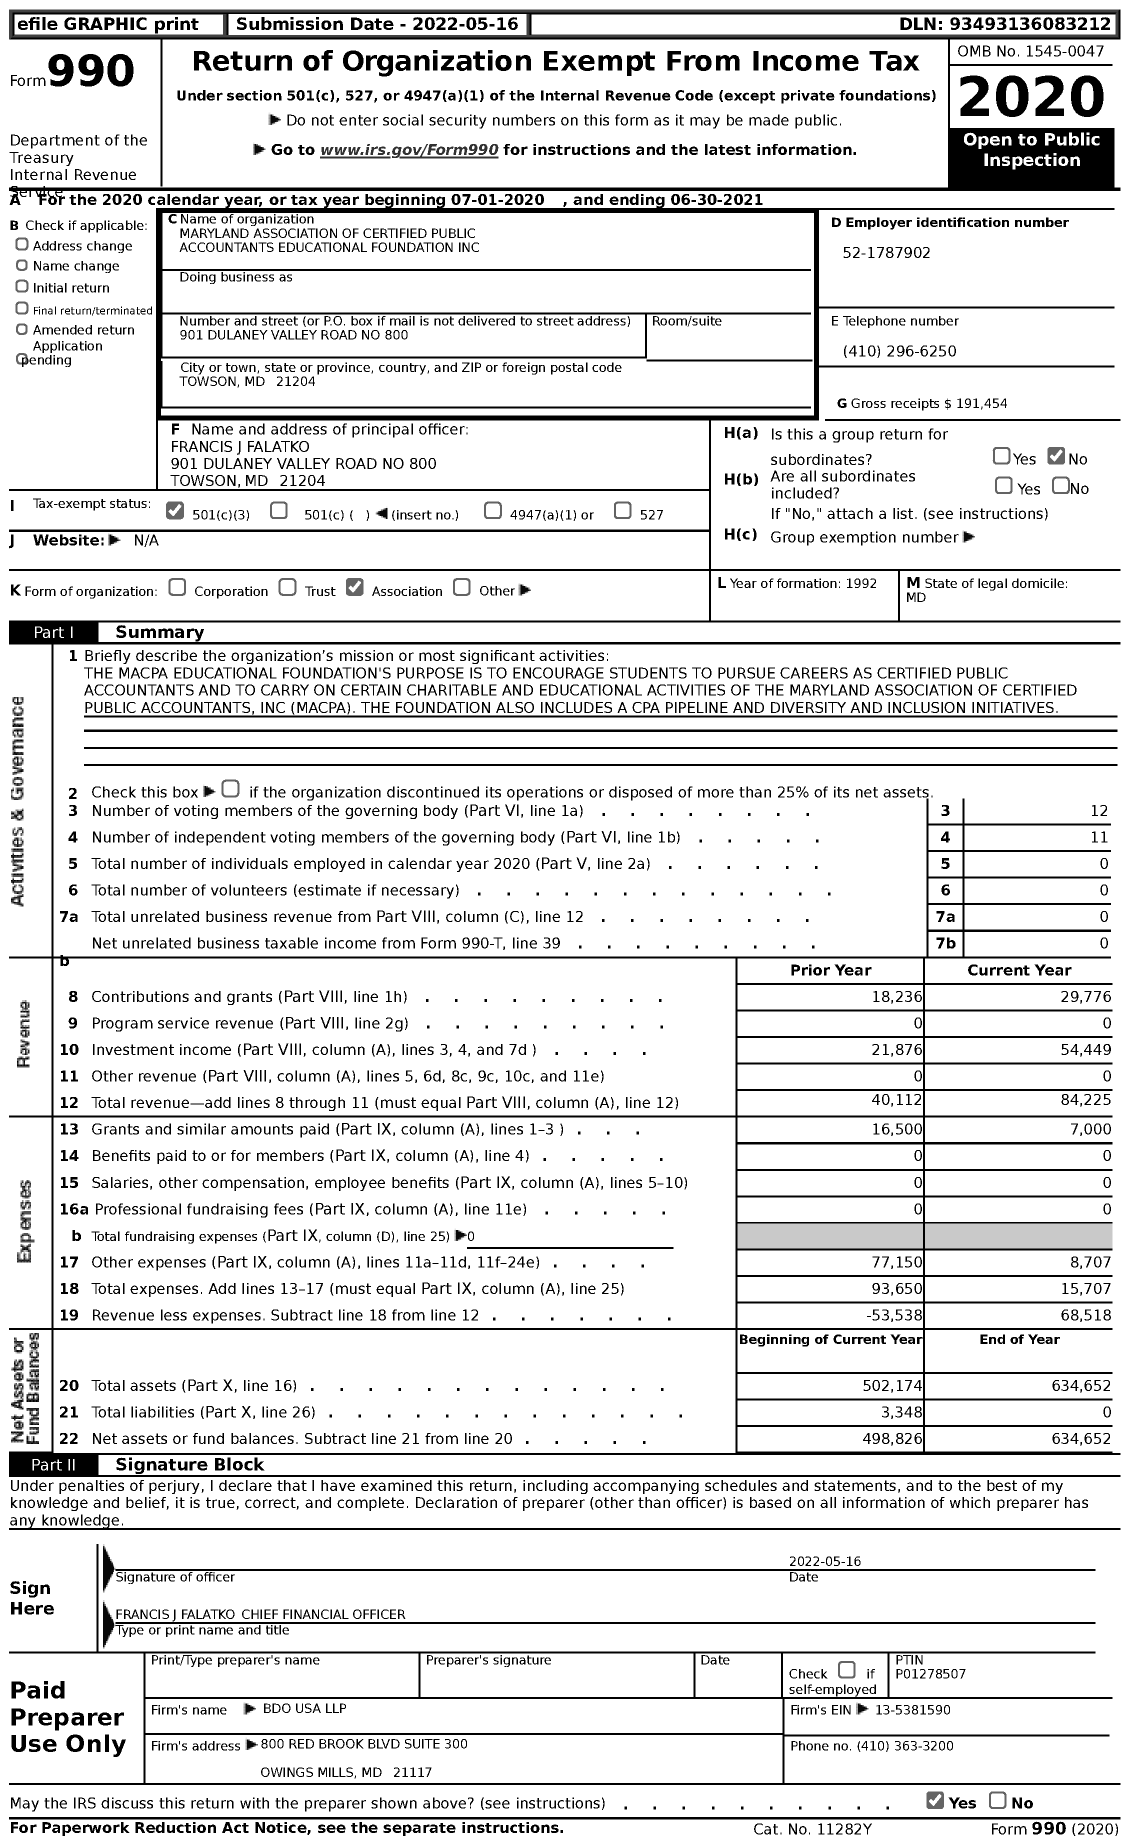 Image of first page of 2020 Form 990 for Maryland Association of Certified Public Accountants Educational Foundation